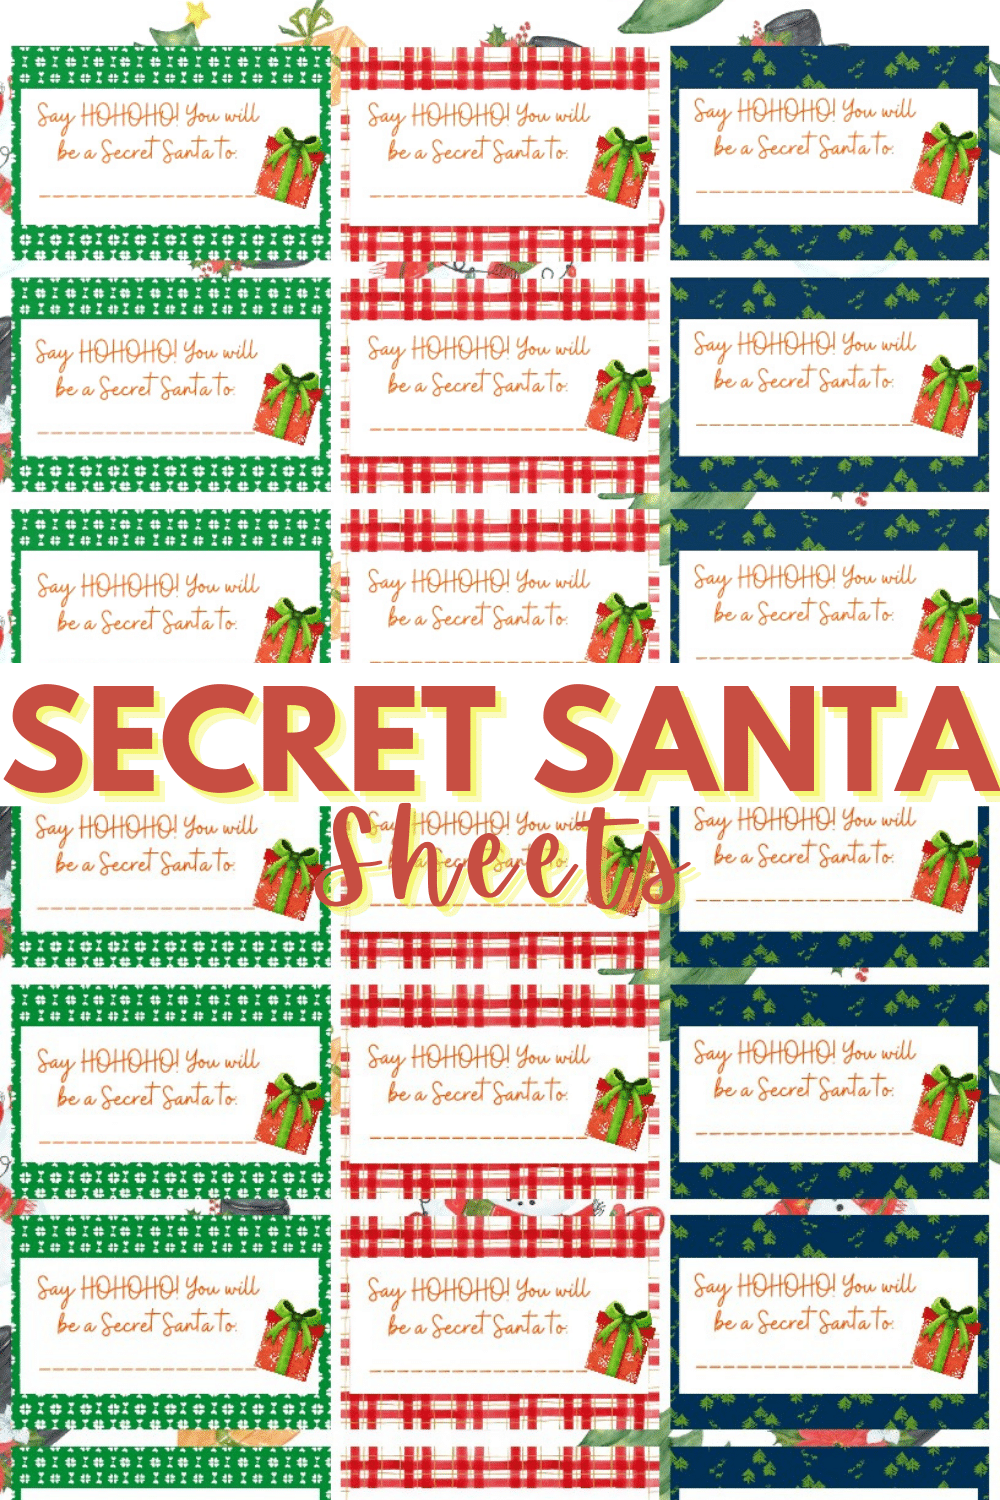 Use these Secret Santa Sheets as a fun way to create an epic gift exchange. This free download is a great way to draw names and participate. #secretsanta #giftexchange #freedownload #freeprintable #christmas via @wondermomwannab